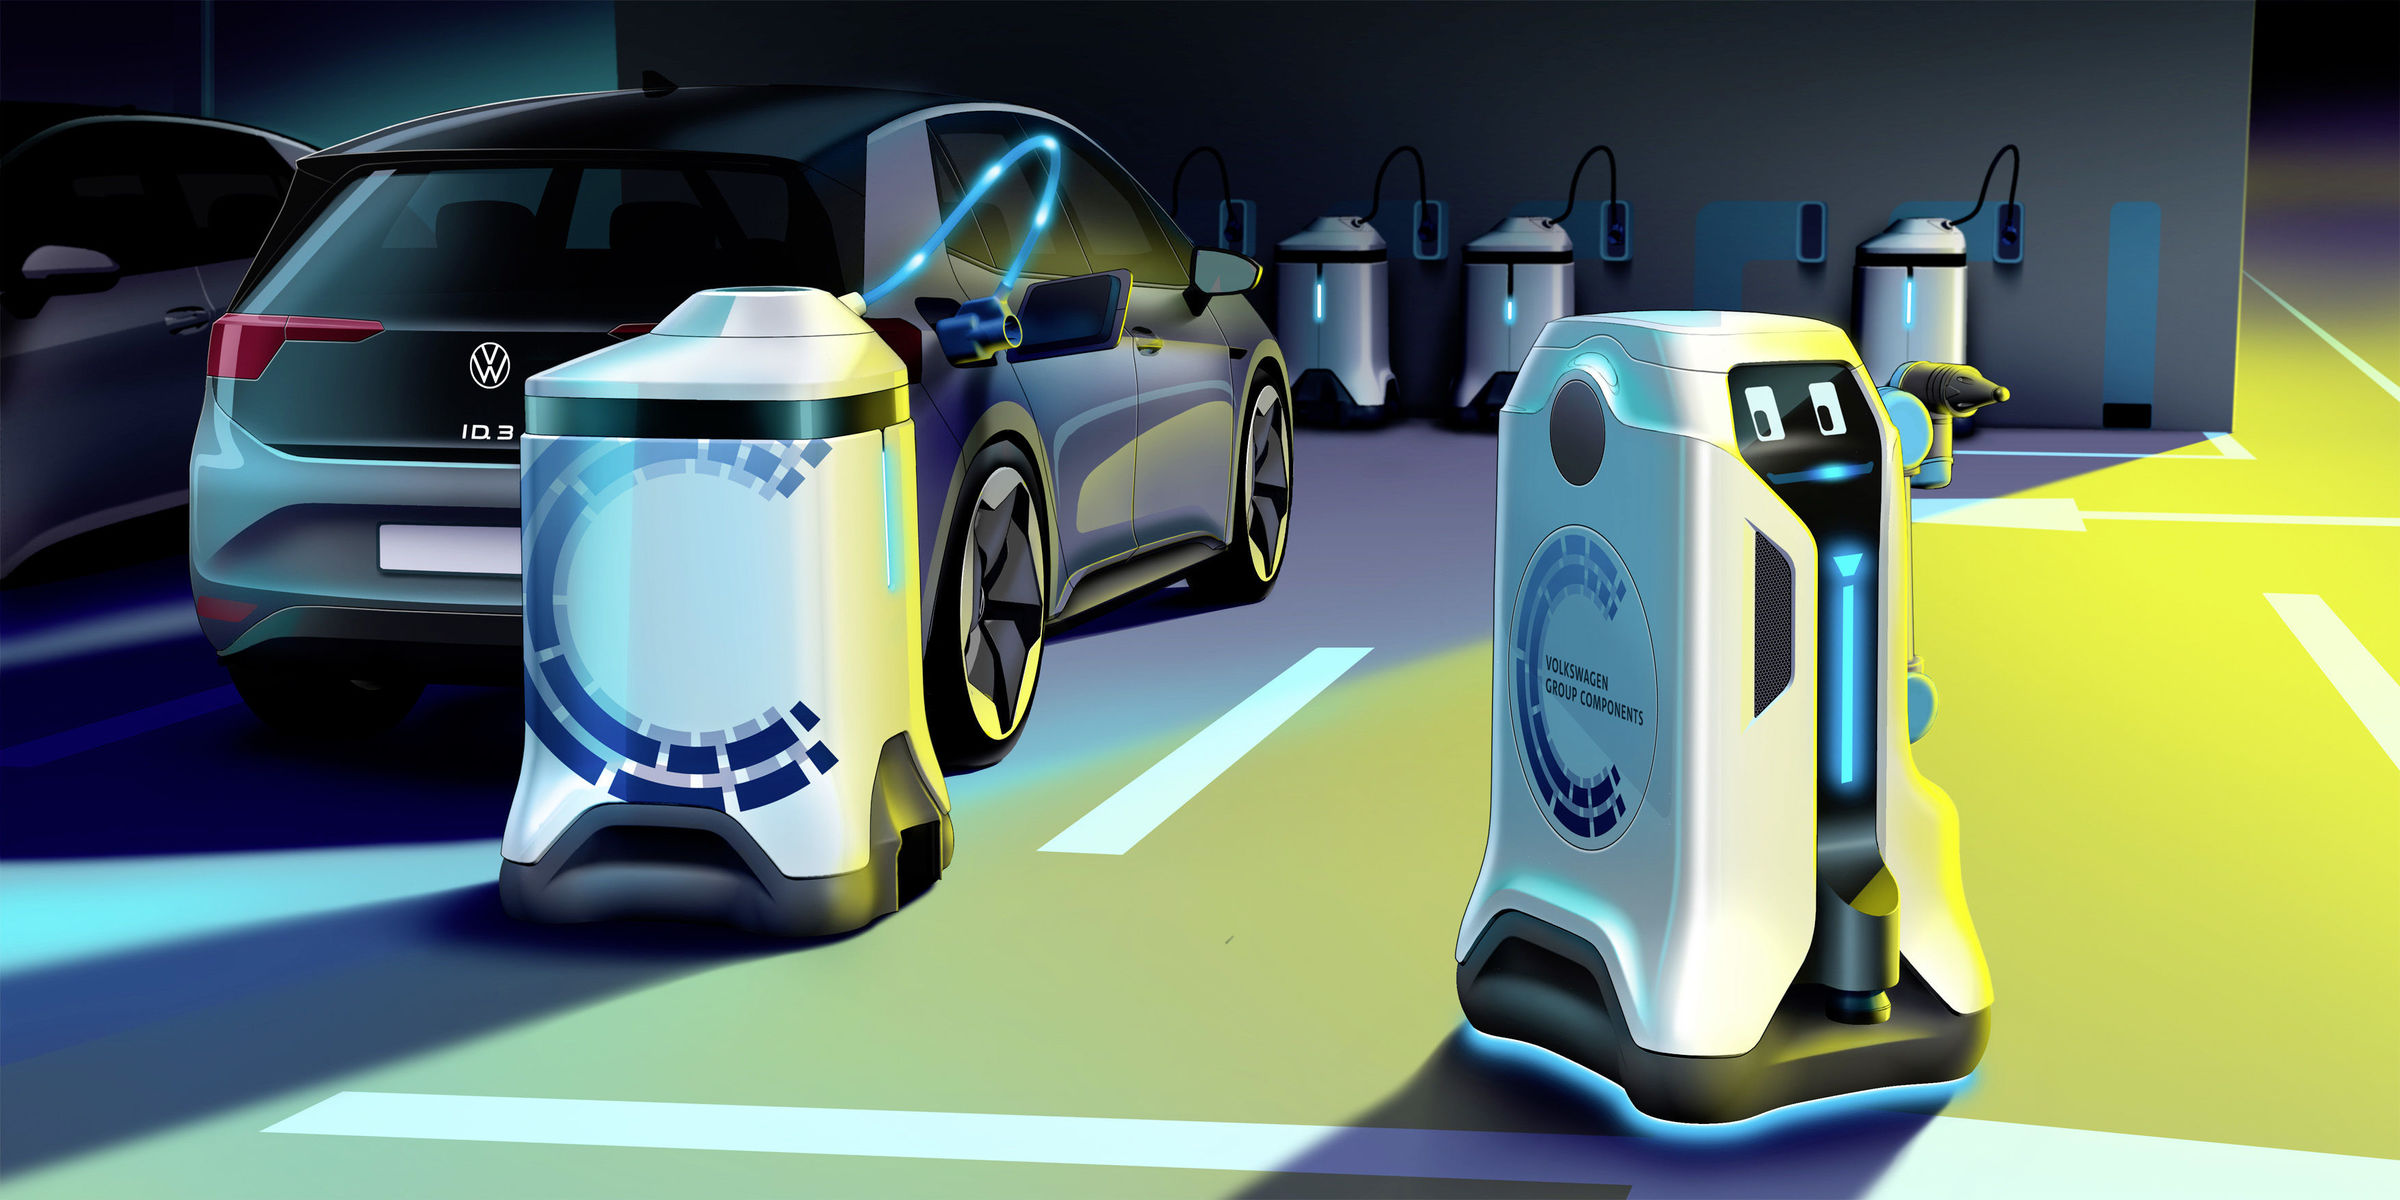 Volkswagen created a mobile robot for charging electric cars in the parking lot